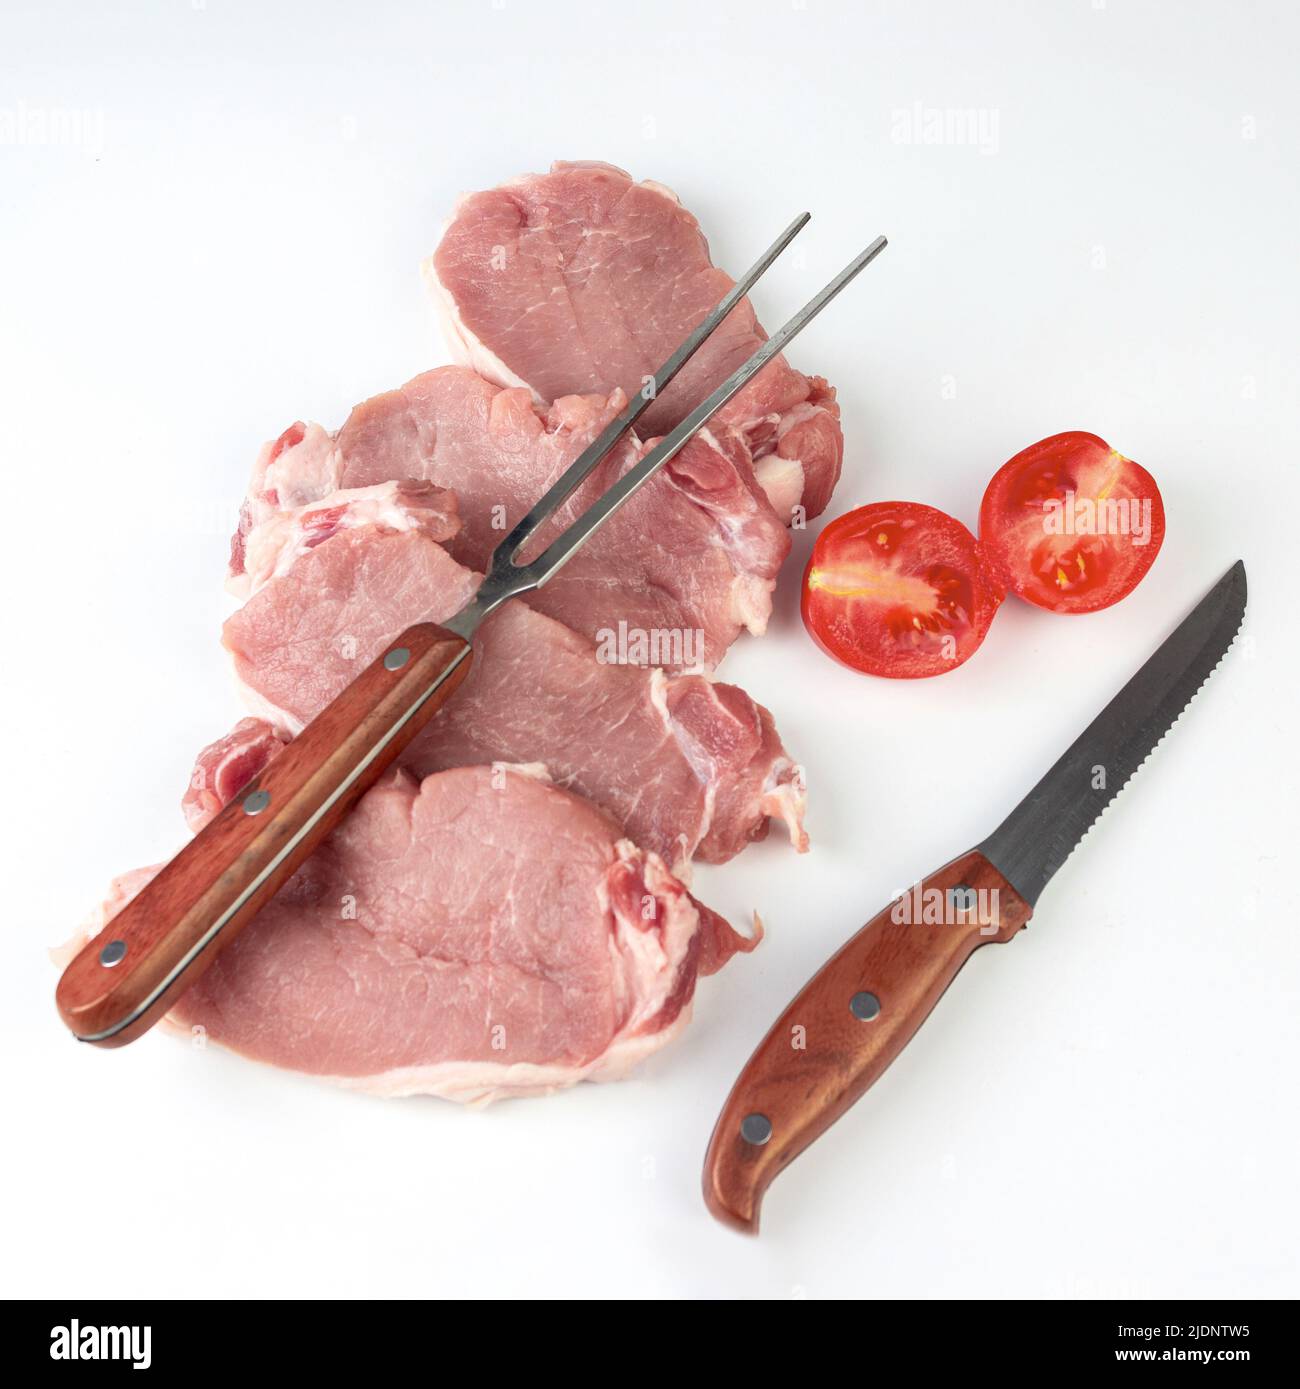 https://c8.alamy.com/comp/2JDNTW5/raw-beef-meat-steaks-on-white-background-close-up-fresh-raw-beef-meat-with-meat-knife-and-fork-2JDNTW5.jpg